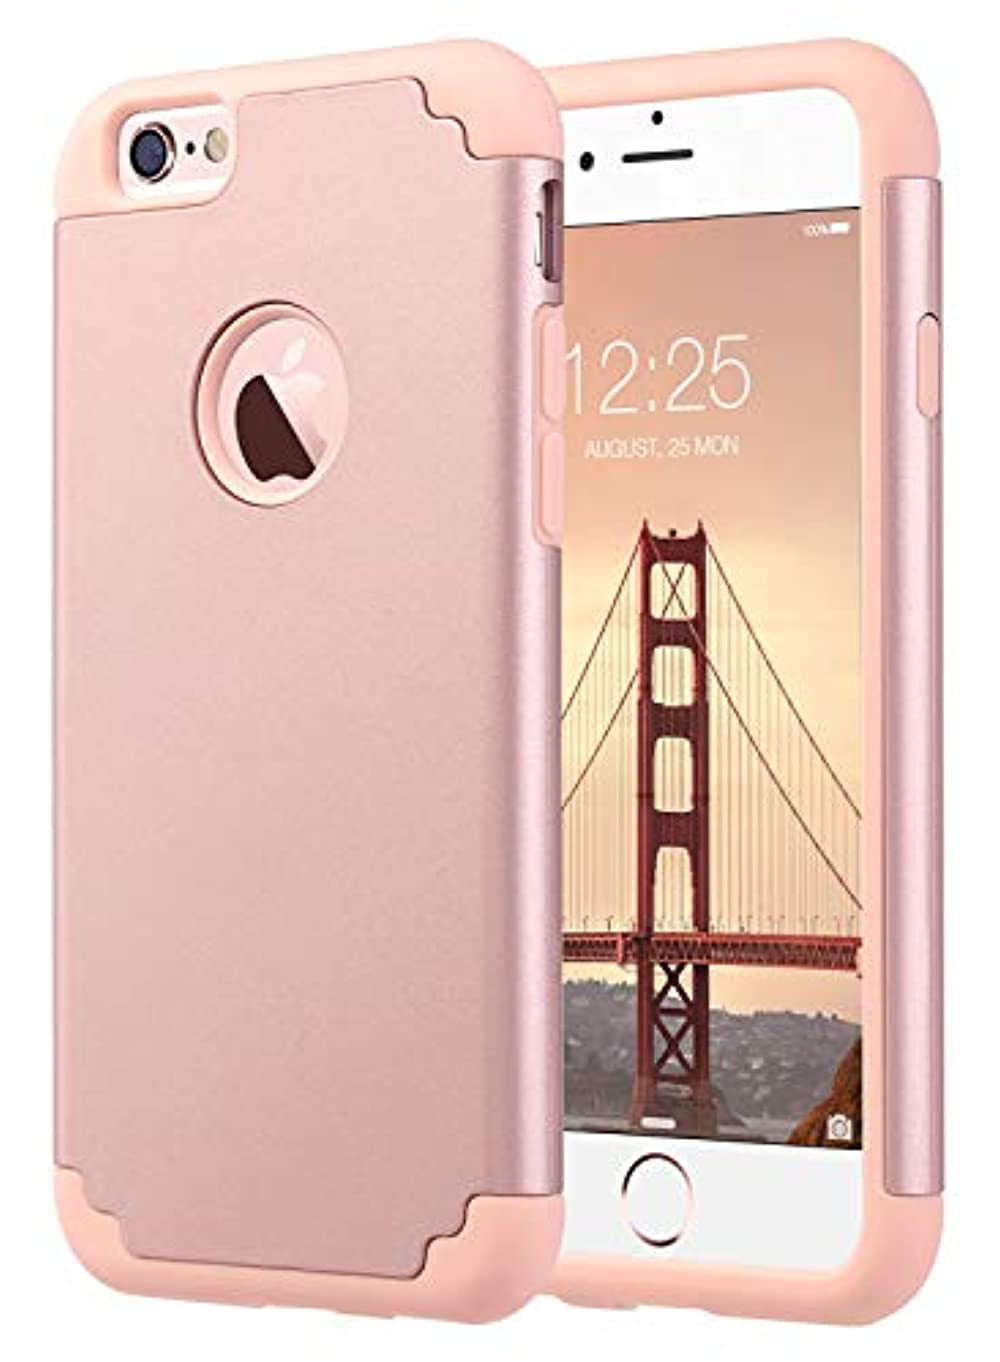 spellen Bedoel proza iPhone 6 Case, iPhone 6S Case (4.7 inch), ULAK Slim Dual Layer Protection  Scratch Resistant Hard Back Cover Shockproof TPU Bumper Case for Apple  iPhone 6 / 6s 4.7 inch - Walmart.com